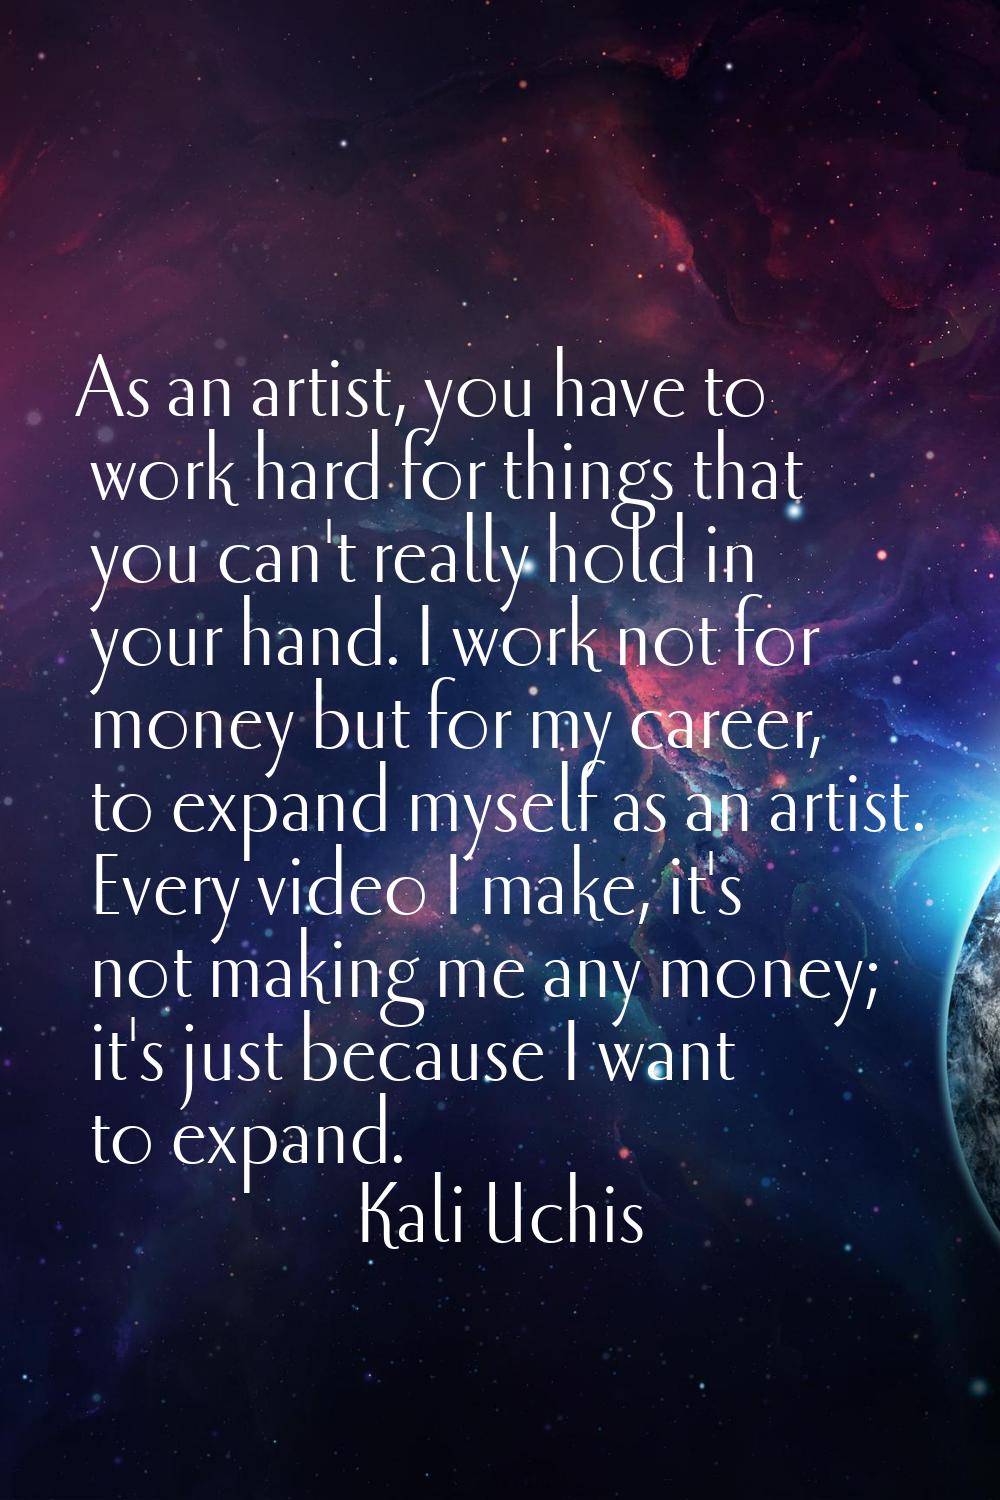 As an artist, you have to work hard for things that you can't really hold in your hand. I work not 